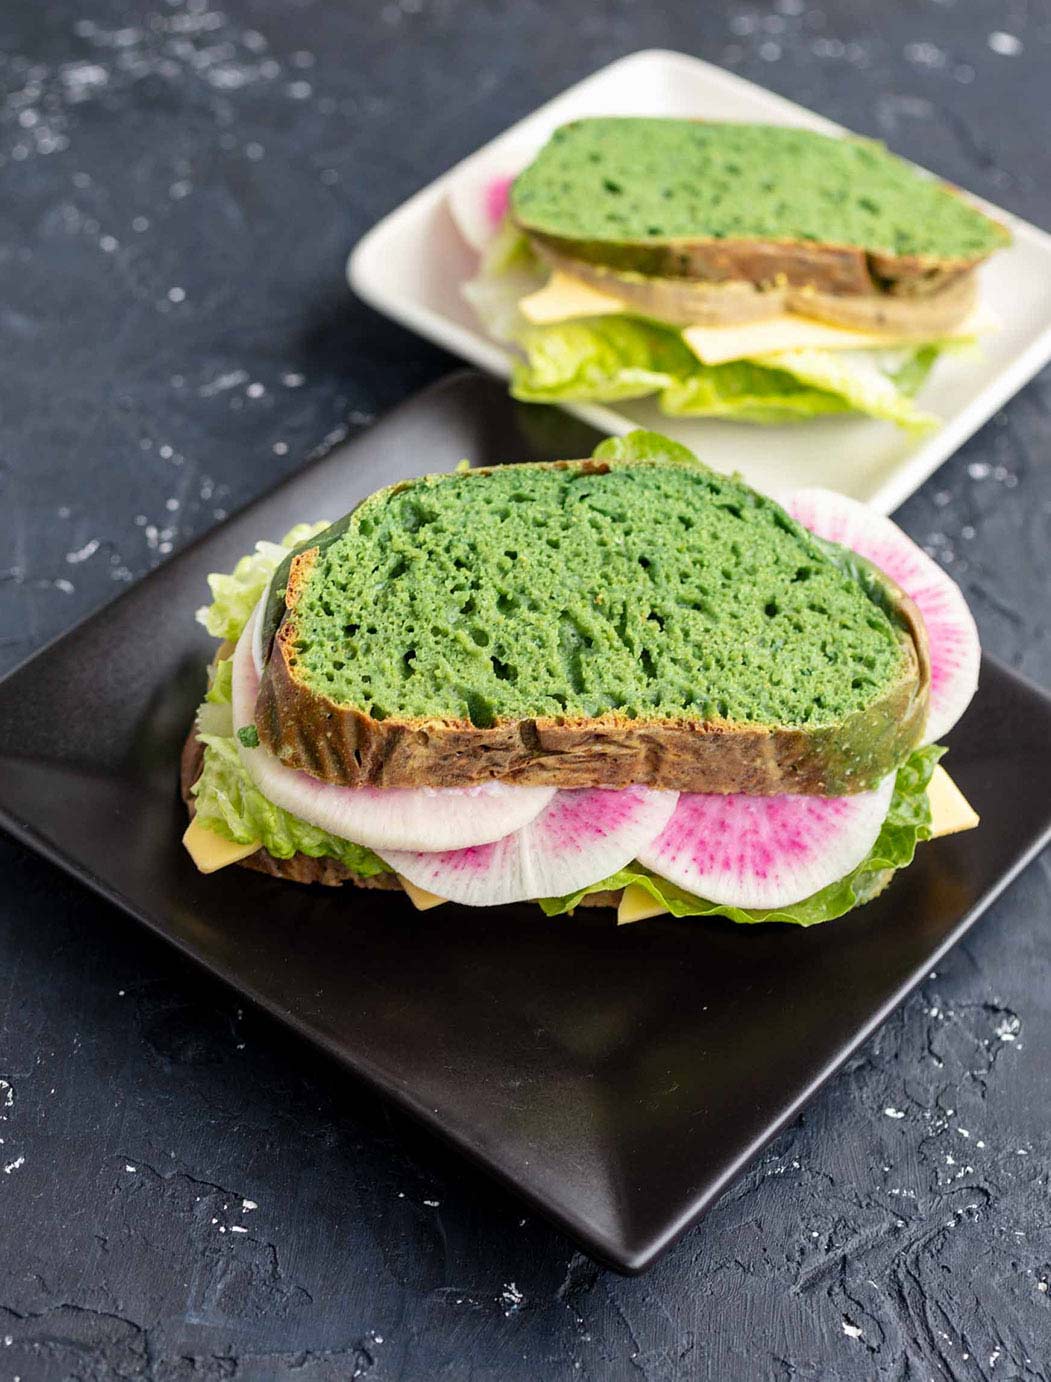 vegan sandwiches using the naturally colored bread